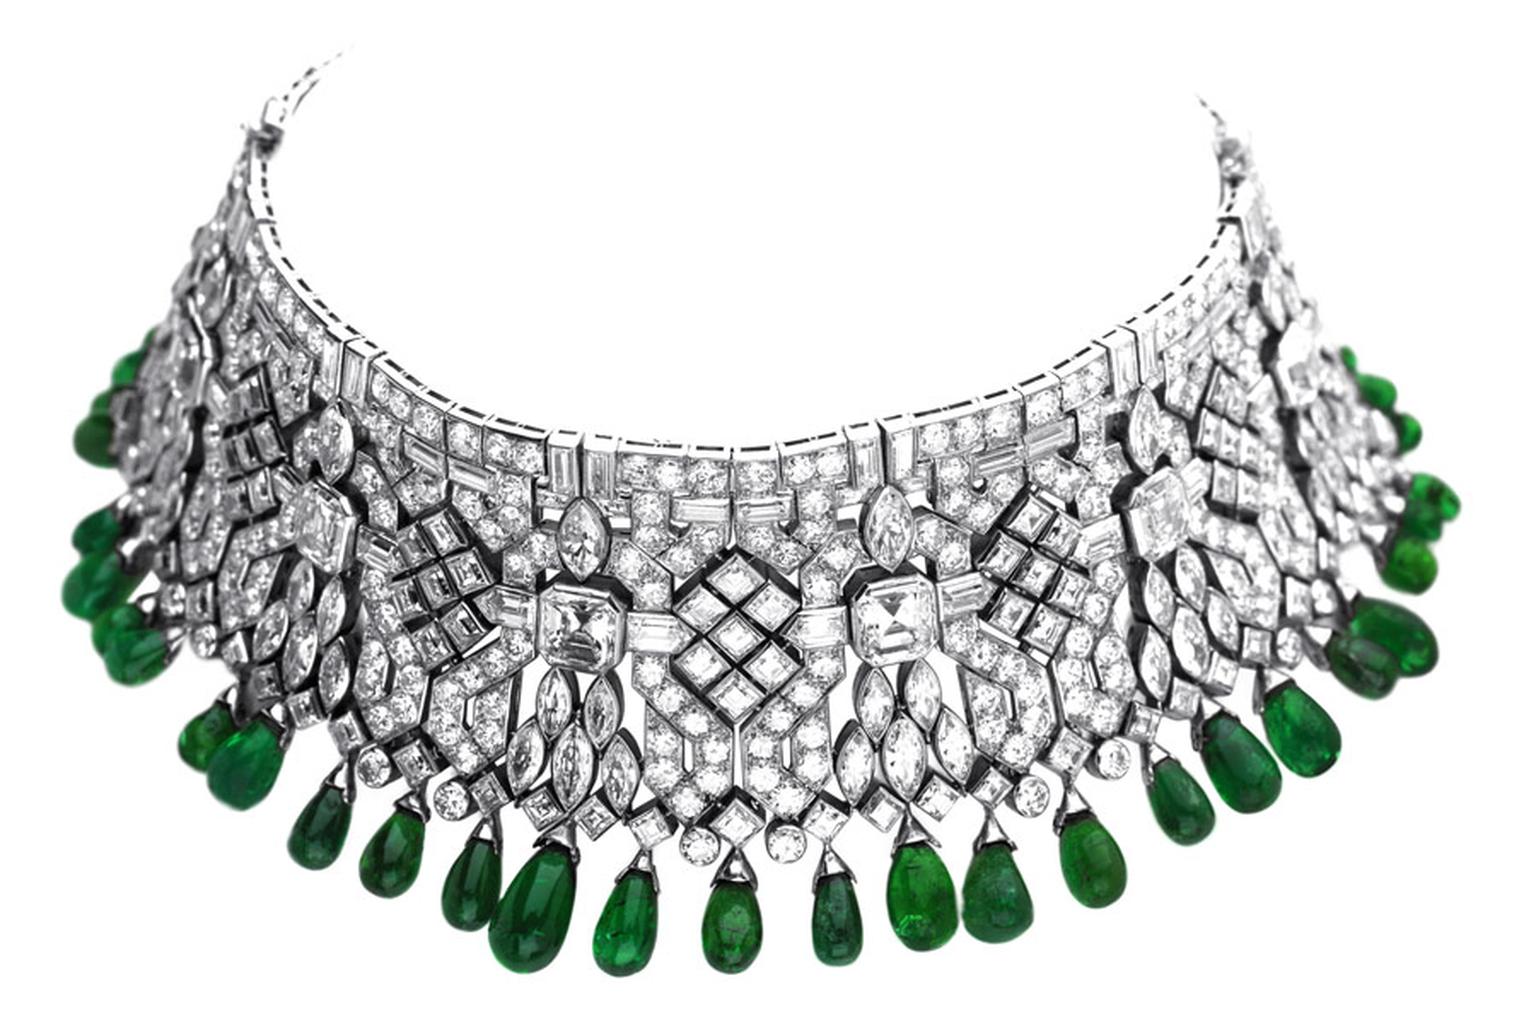 Van-Cleef-Arpels-Indian-bracelets-transformable-into-a-choker-ordered-by-Daisy-Fellowes-1928-Private-Collection_3.jpg